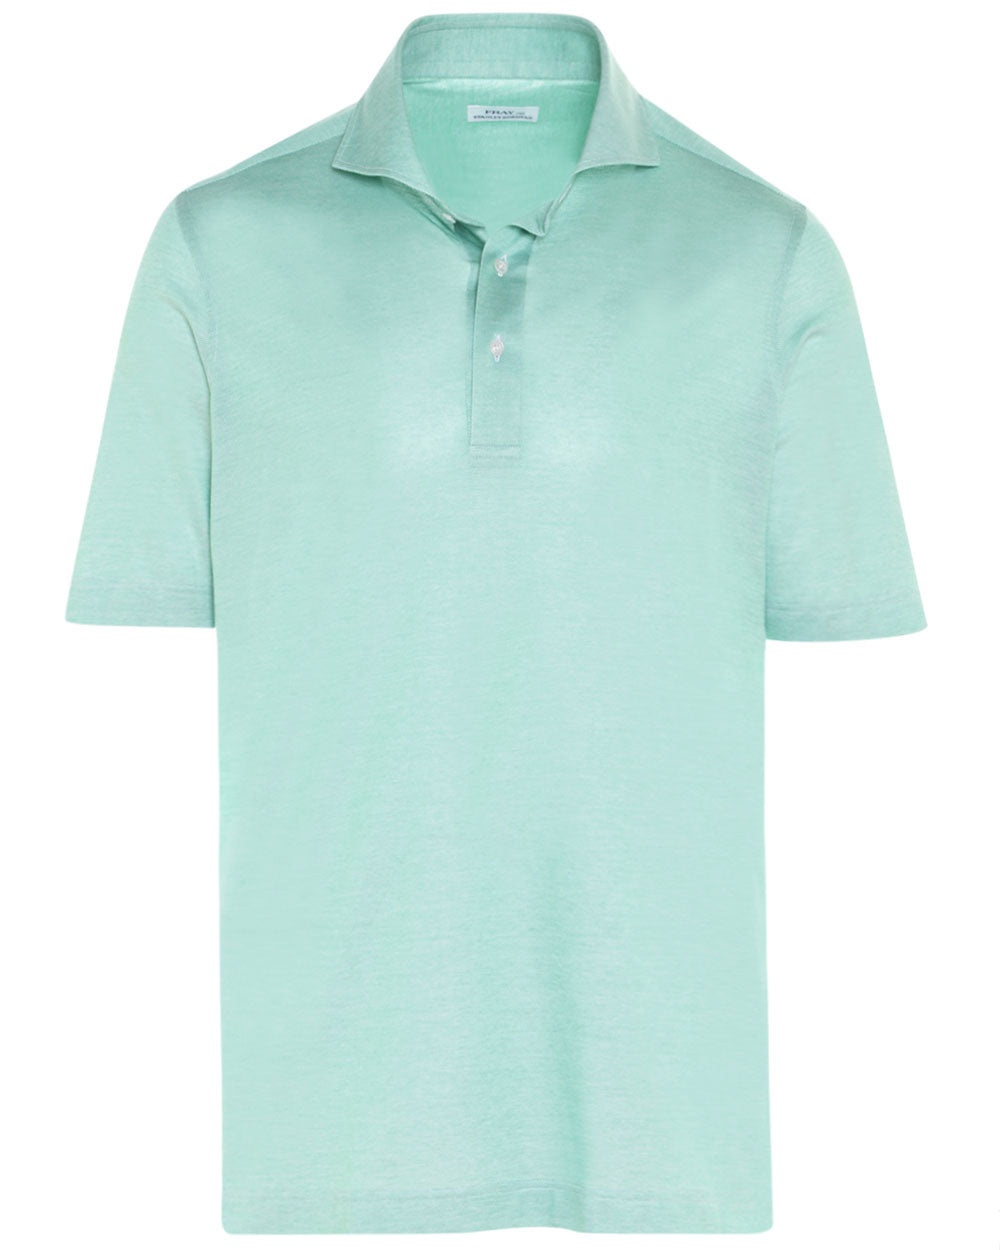 Light Green Feathered Cotton Knit Short Sleeve Polo